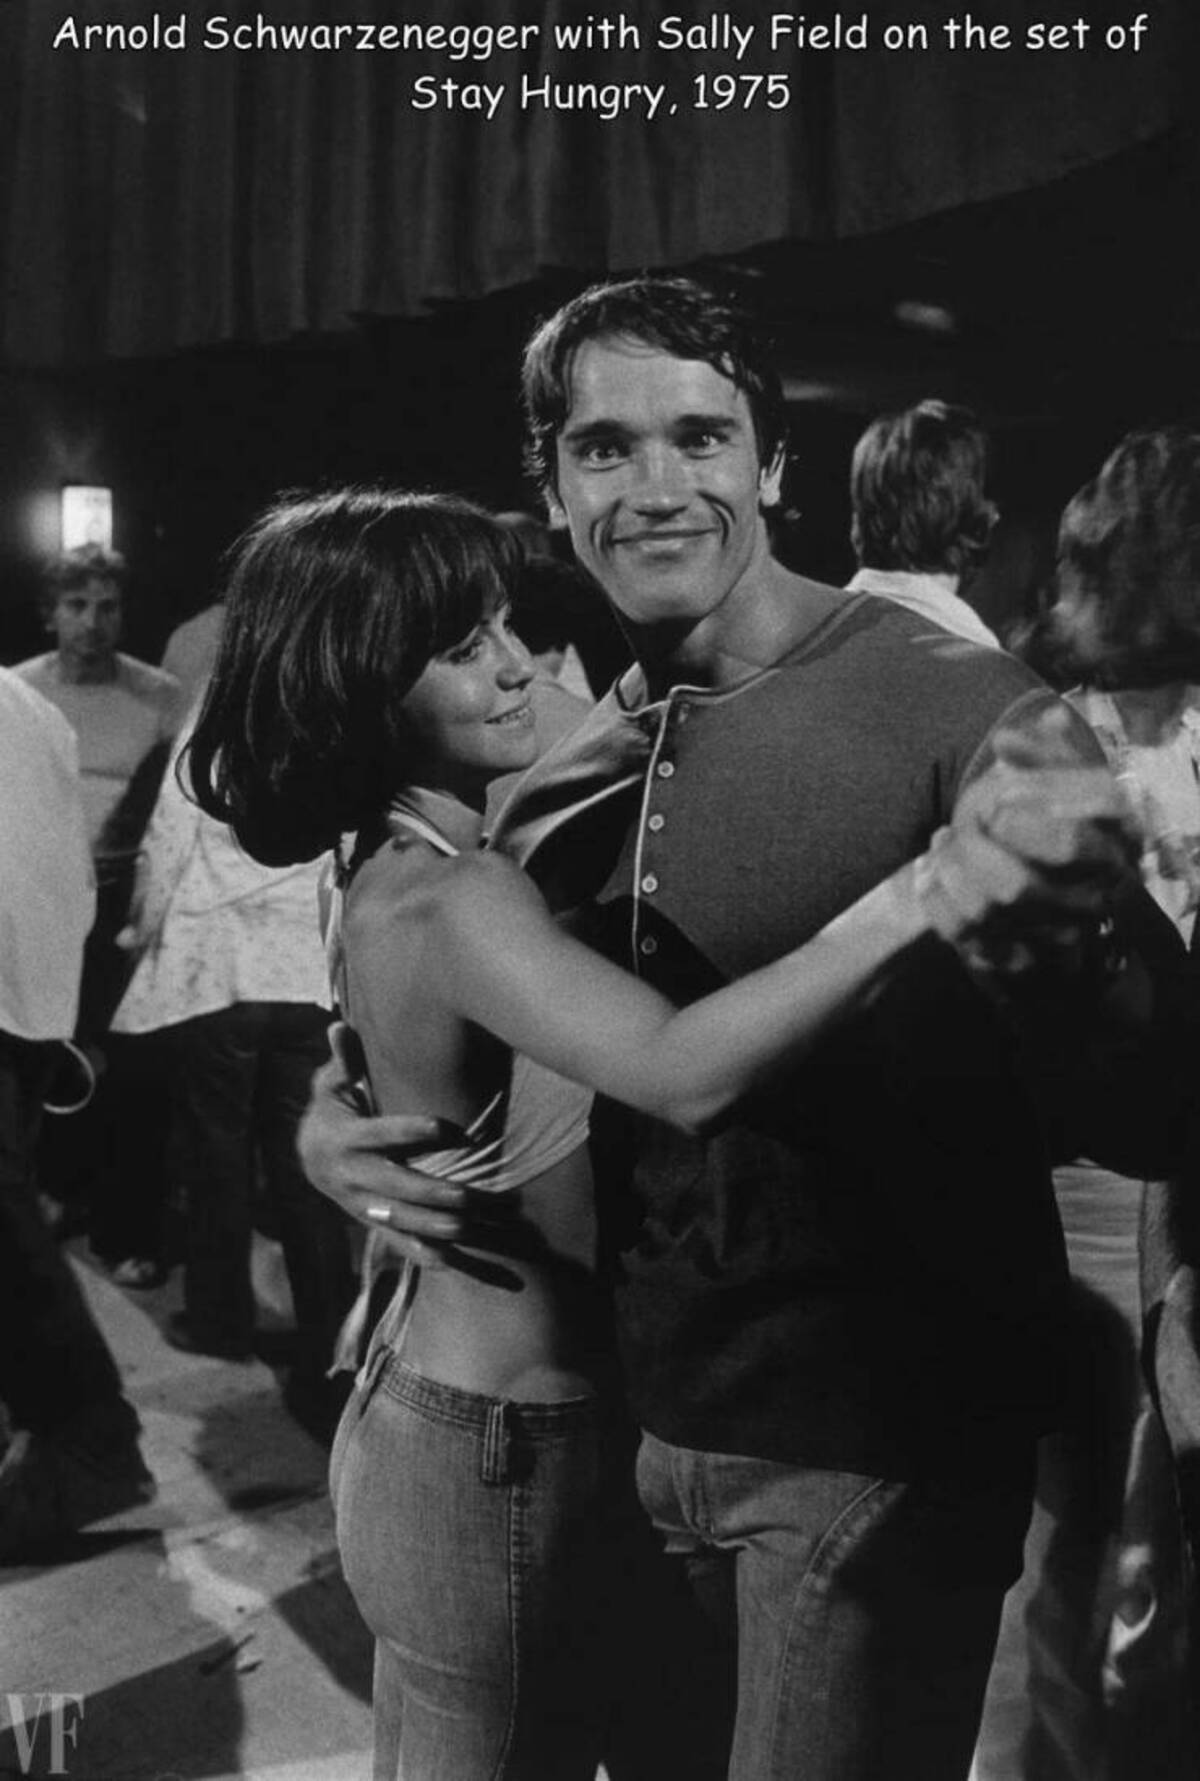 sally field stay hungry - Vf Arnold Schwarzenegger with Sally Field on the set of Stay Hungry, 1975 D